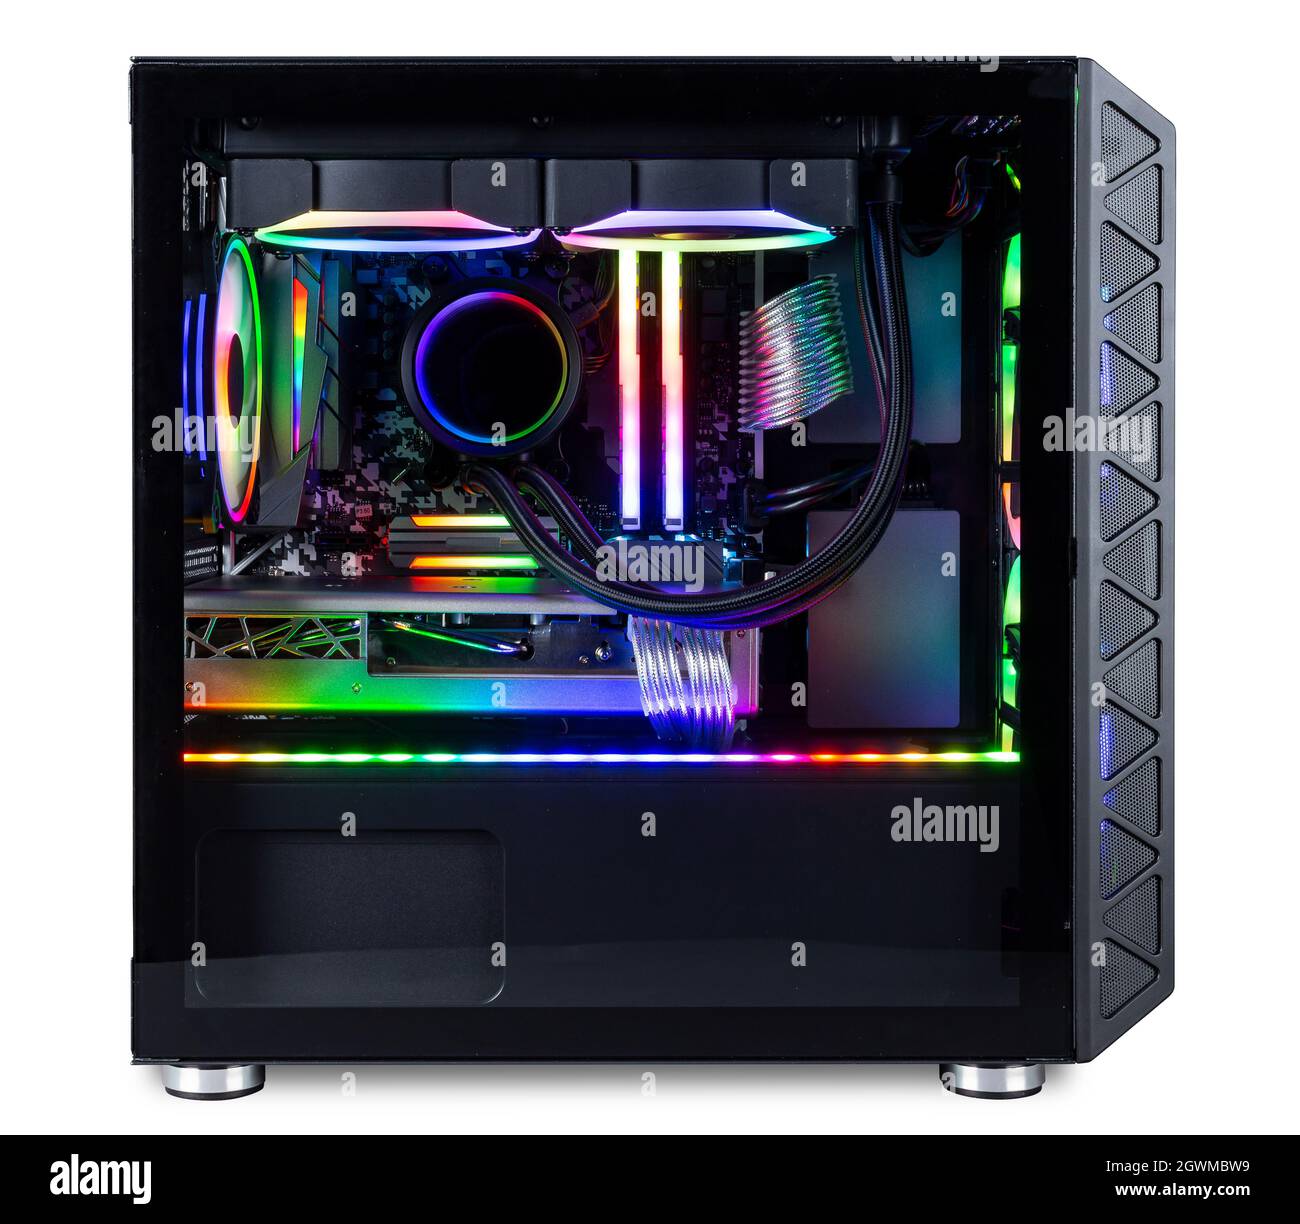 black custom gaming pc computer with glass windows and colorful bright rgb rainbow led lighting isolated on white background Stock Photo